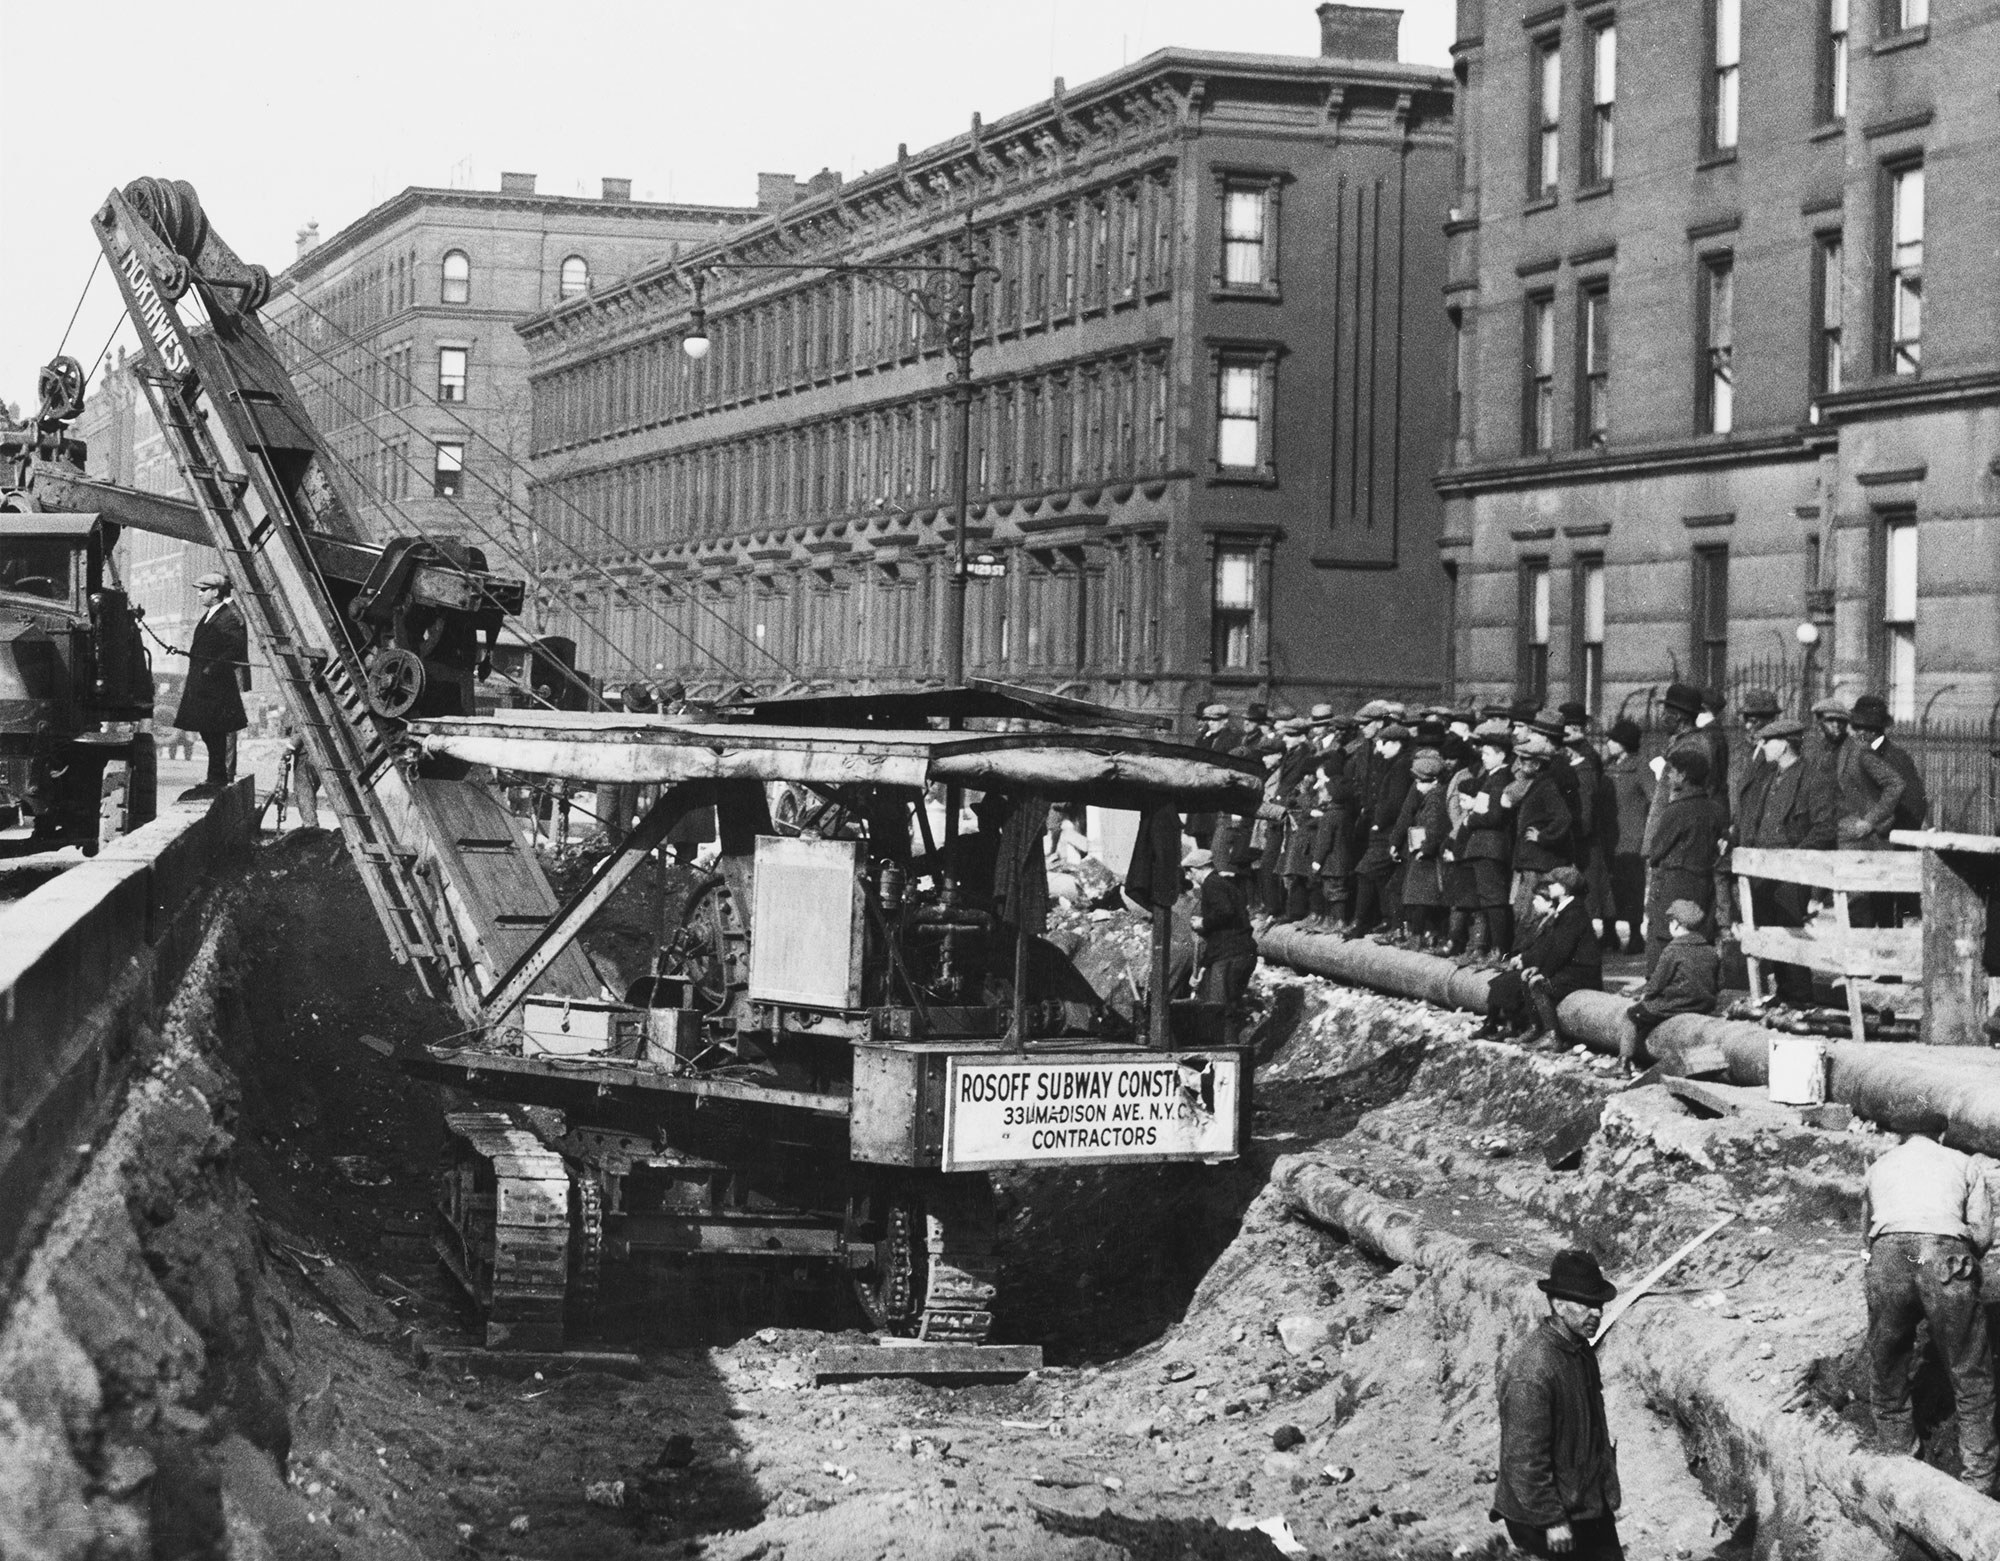 A crowd of pedestrians stand beside a large excavator machine in a hole in the street, digging a tunnel